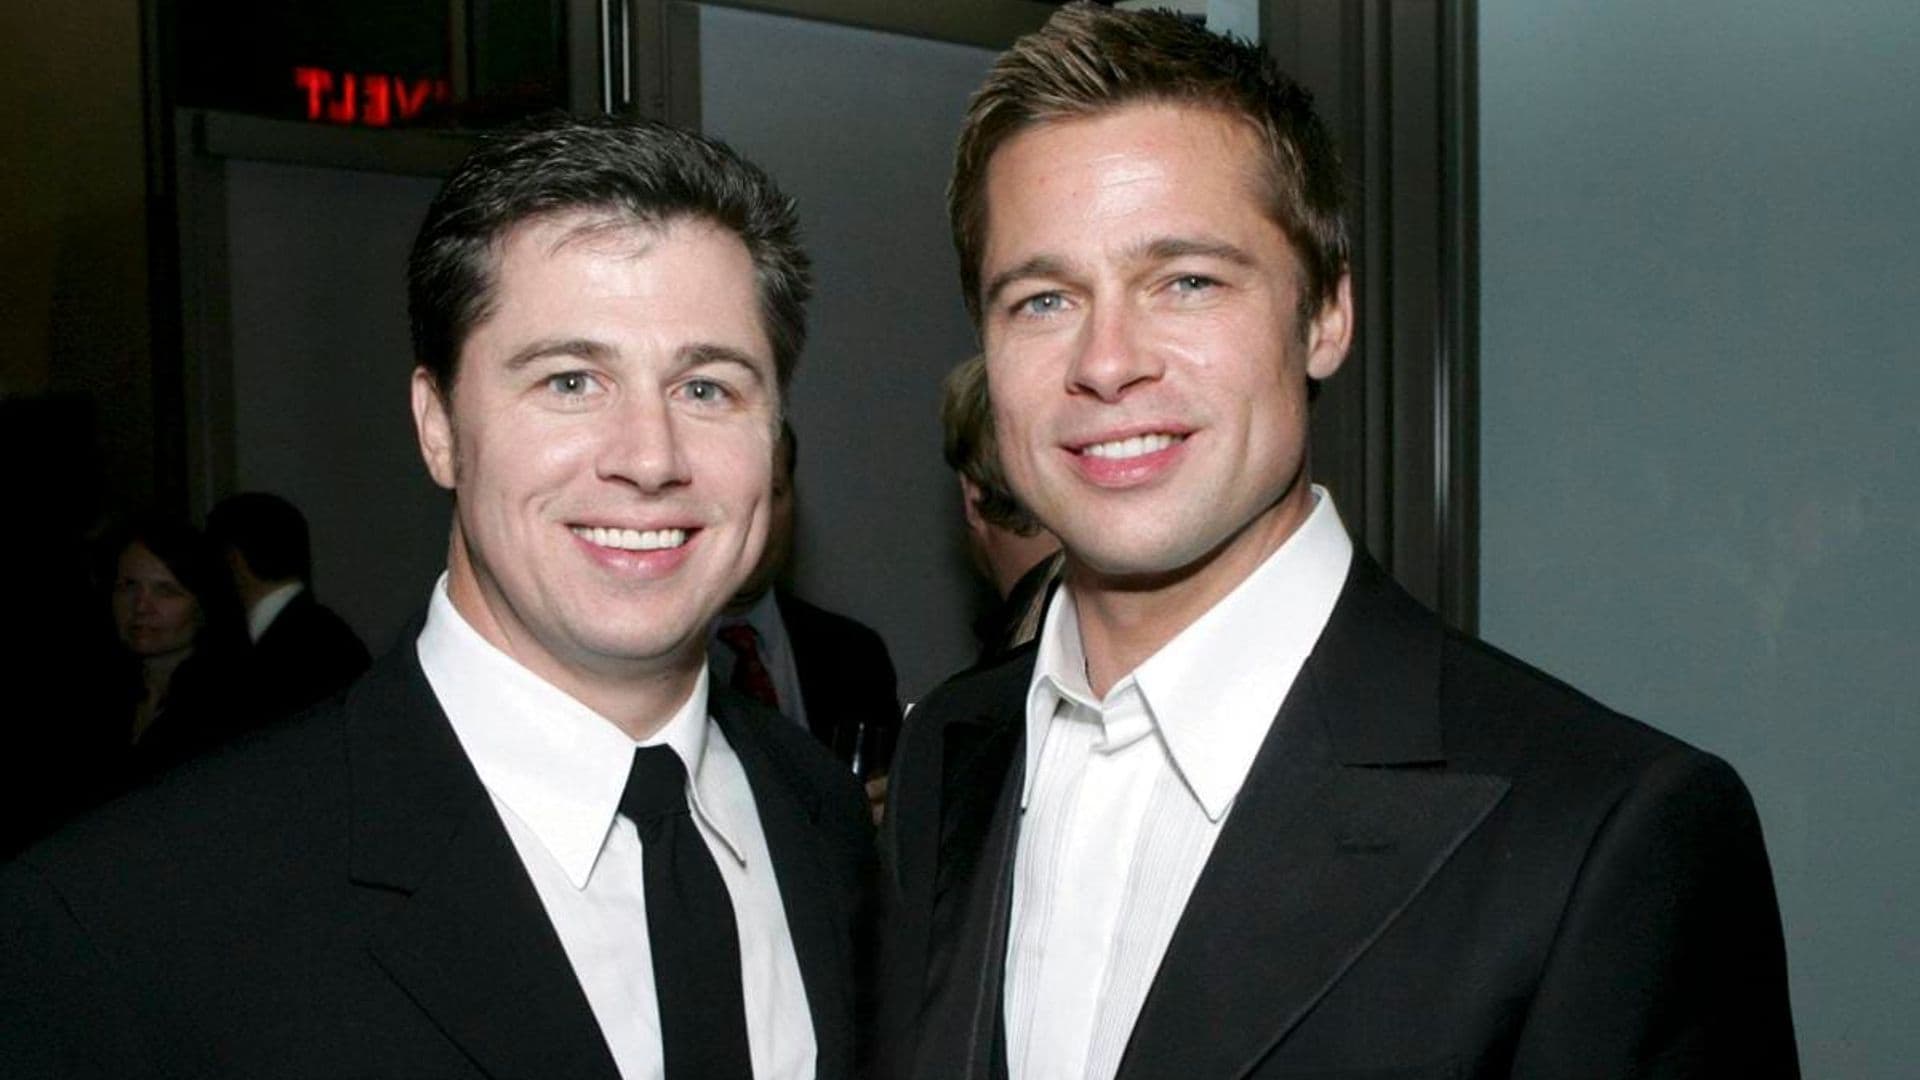 7 Facts about Brad Pitt’s Succesful Younger Brother Doug Pitt